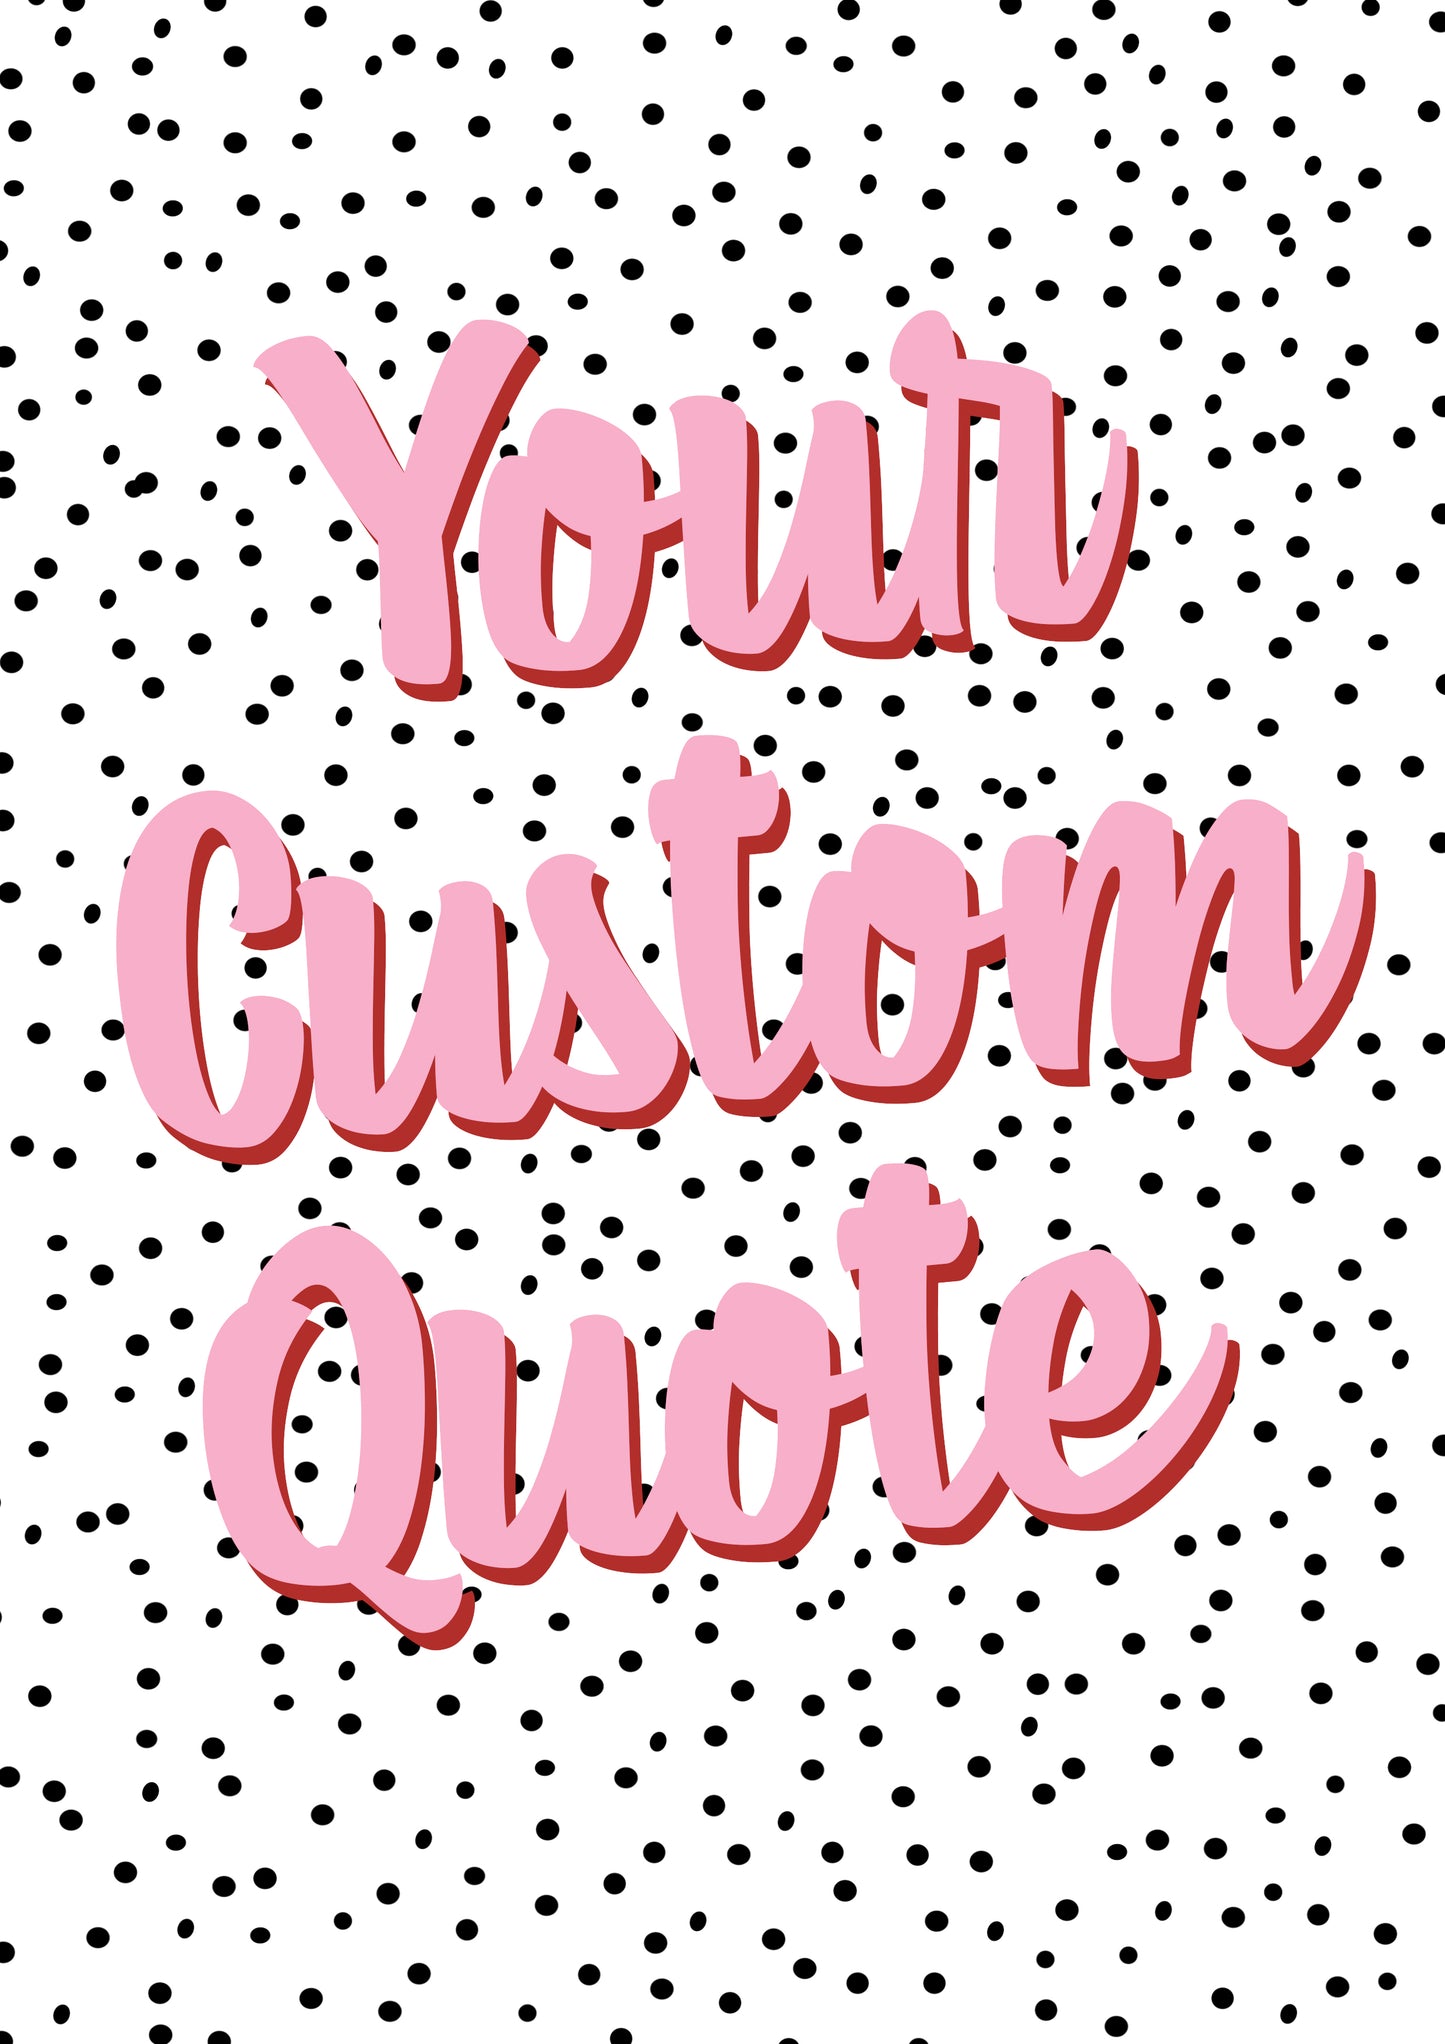 Your Custom Quote Here Spotty Pink Personalised Print